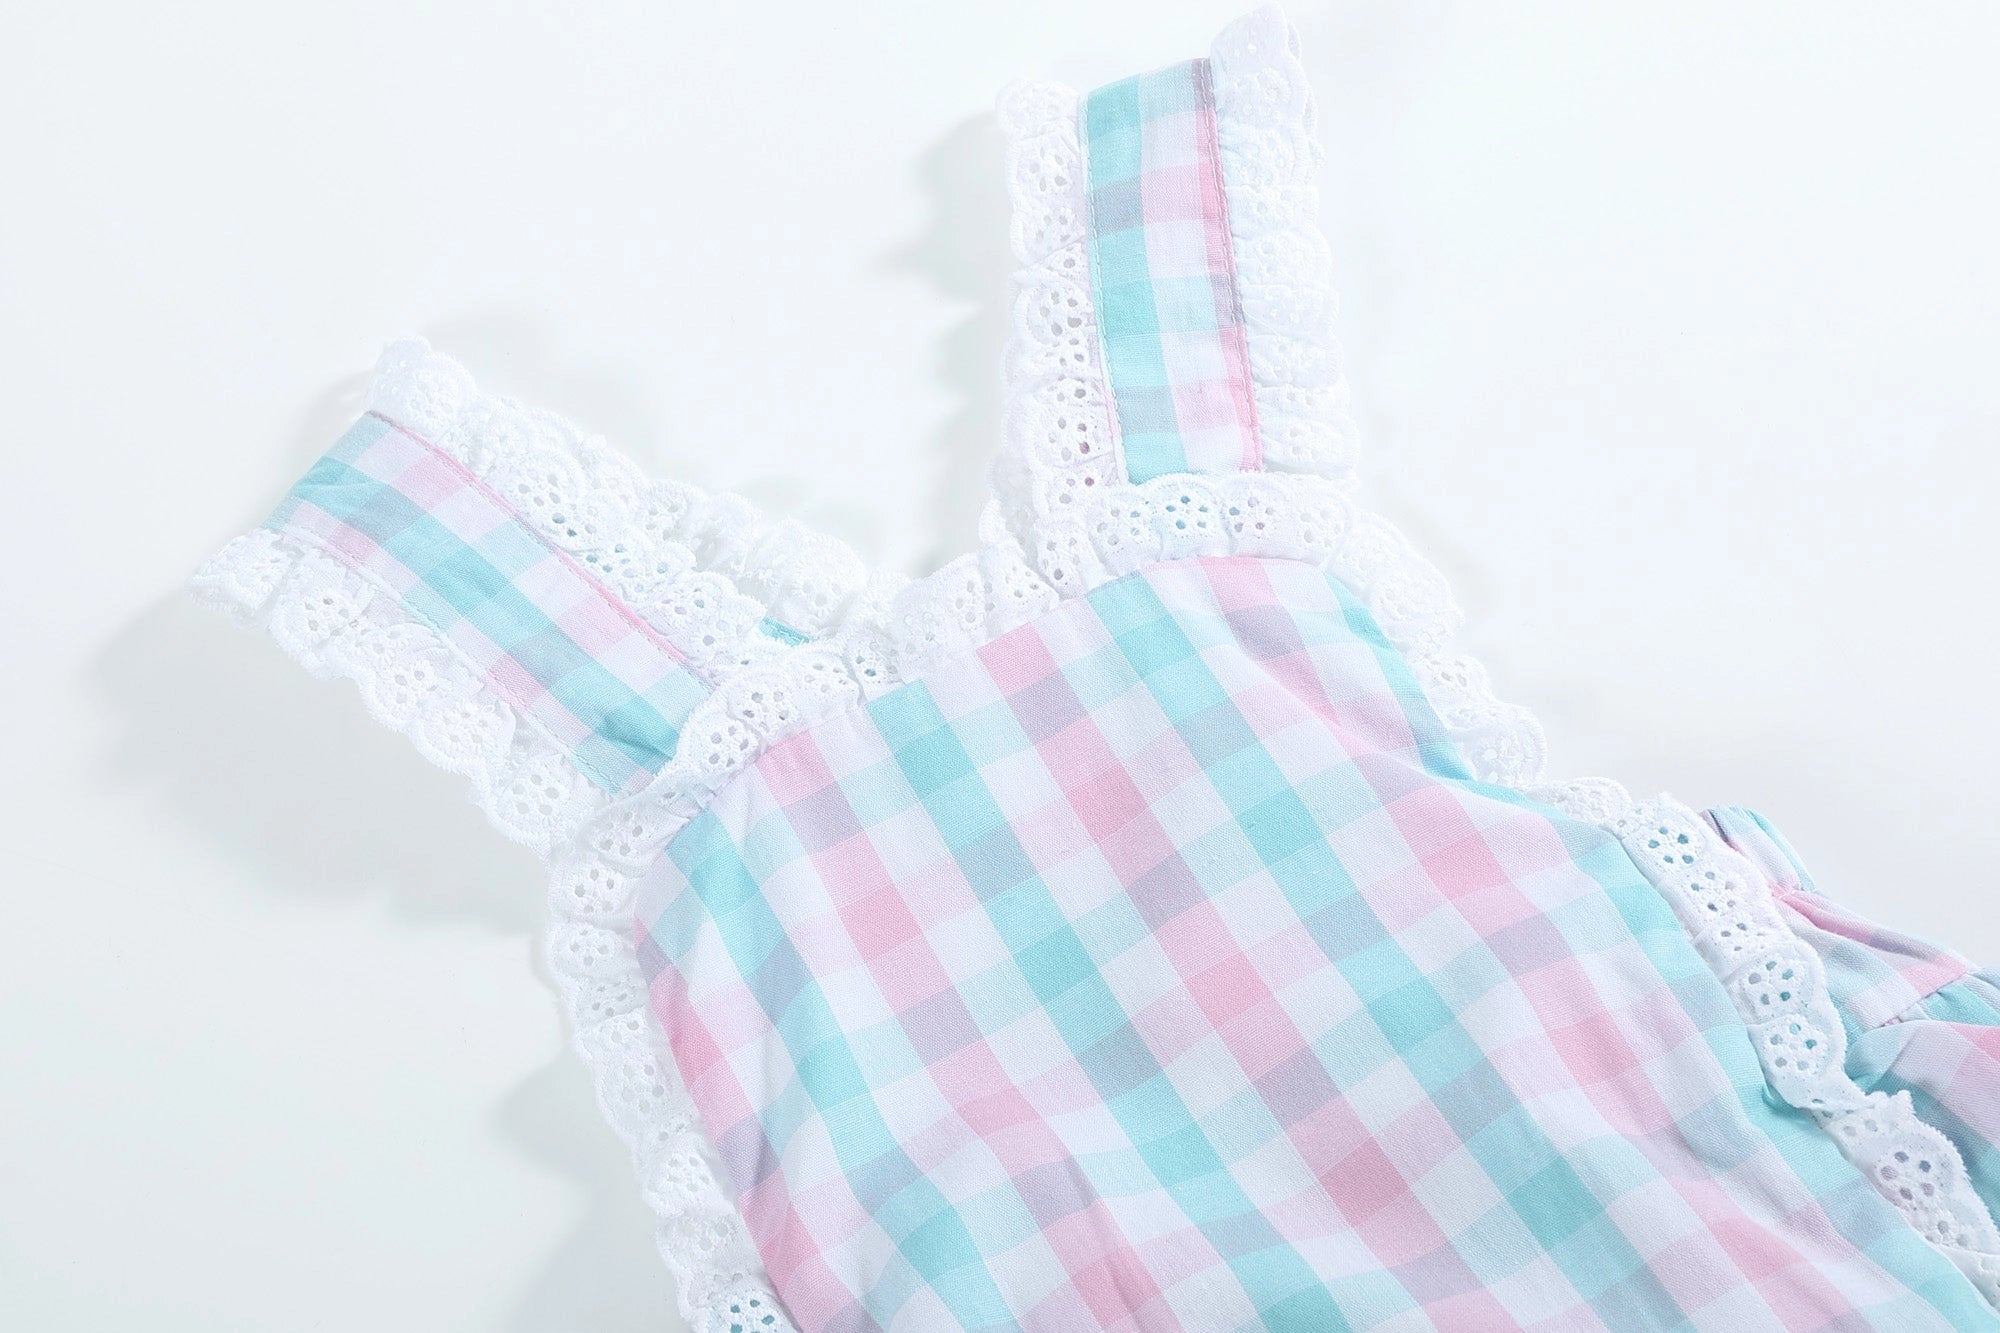 Gingham & Lace Bow Romper